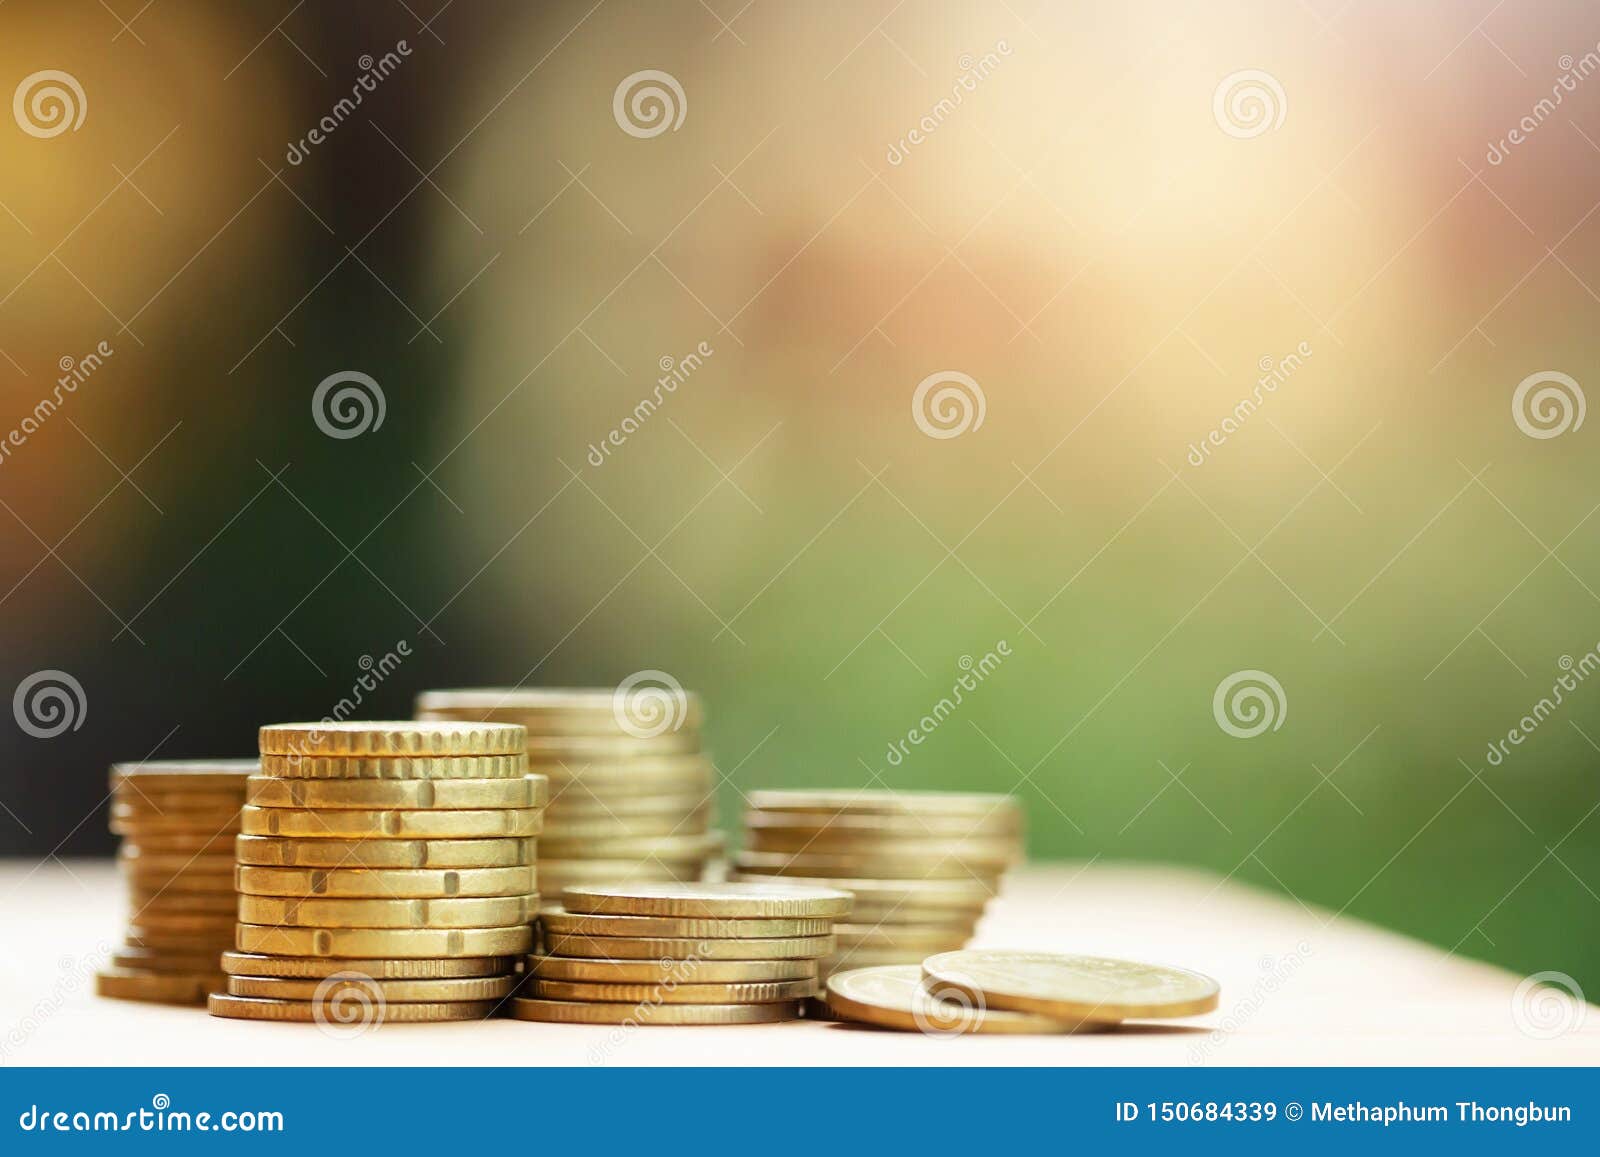 saving money concept preset by money coins stacked on each other in different positions for growing your business.